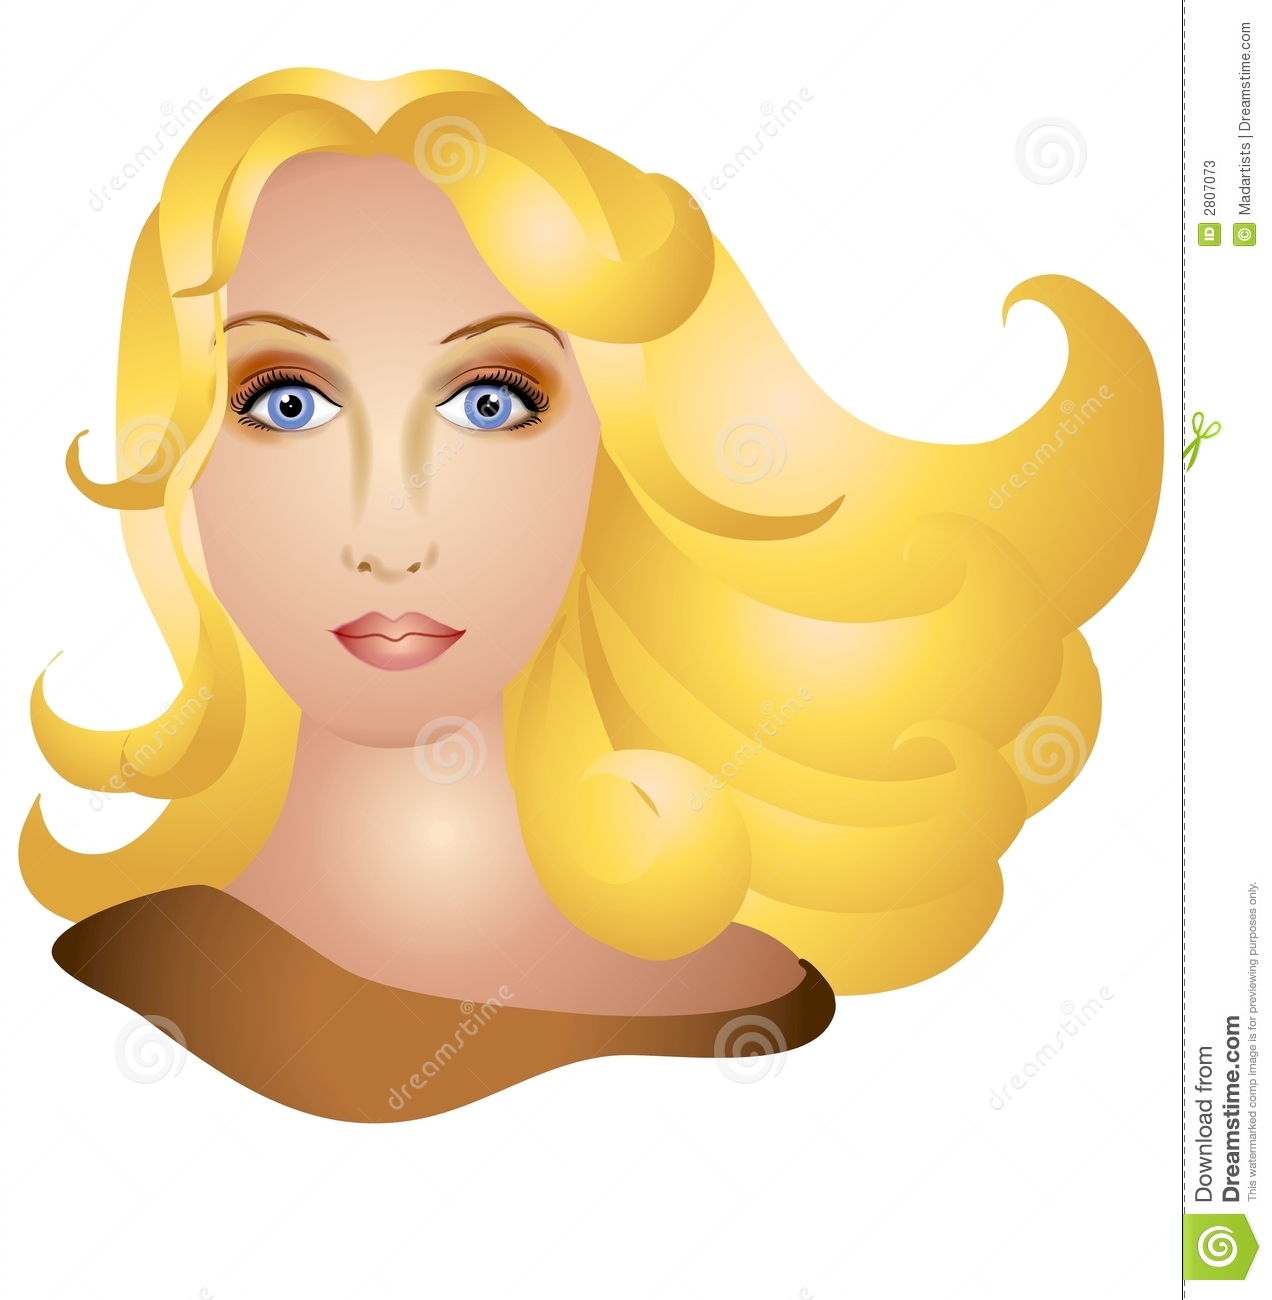 Clip Art Illustration Of A Woman   A Female Model With Long Blonde